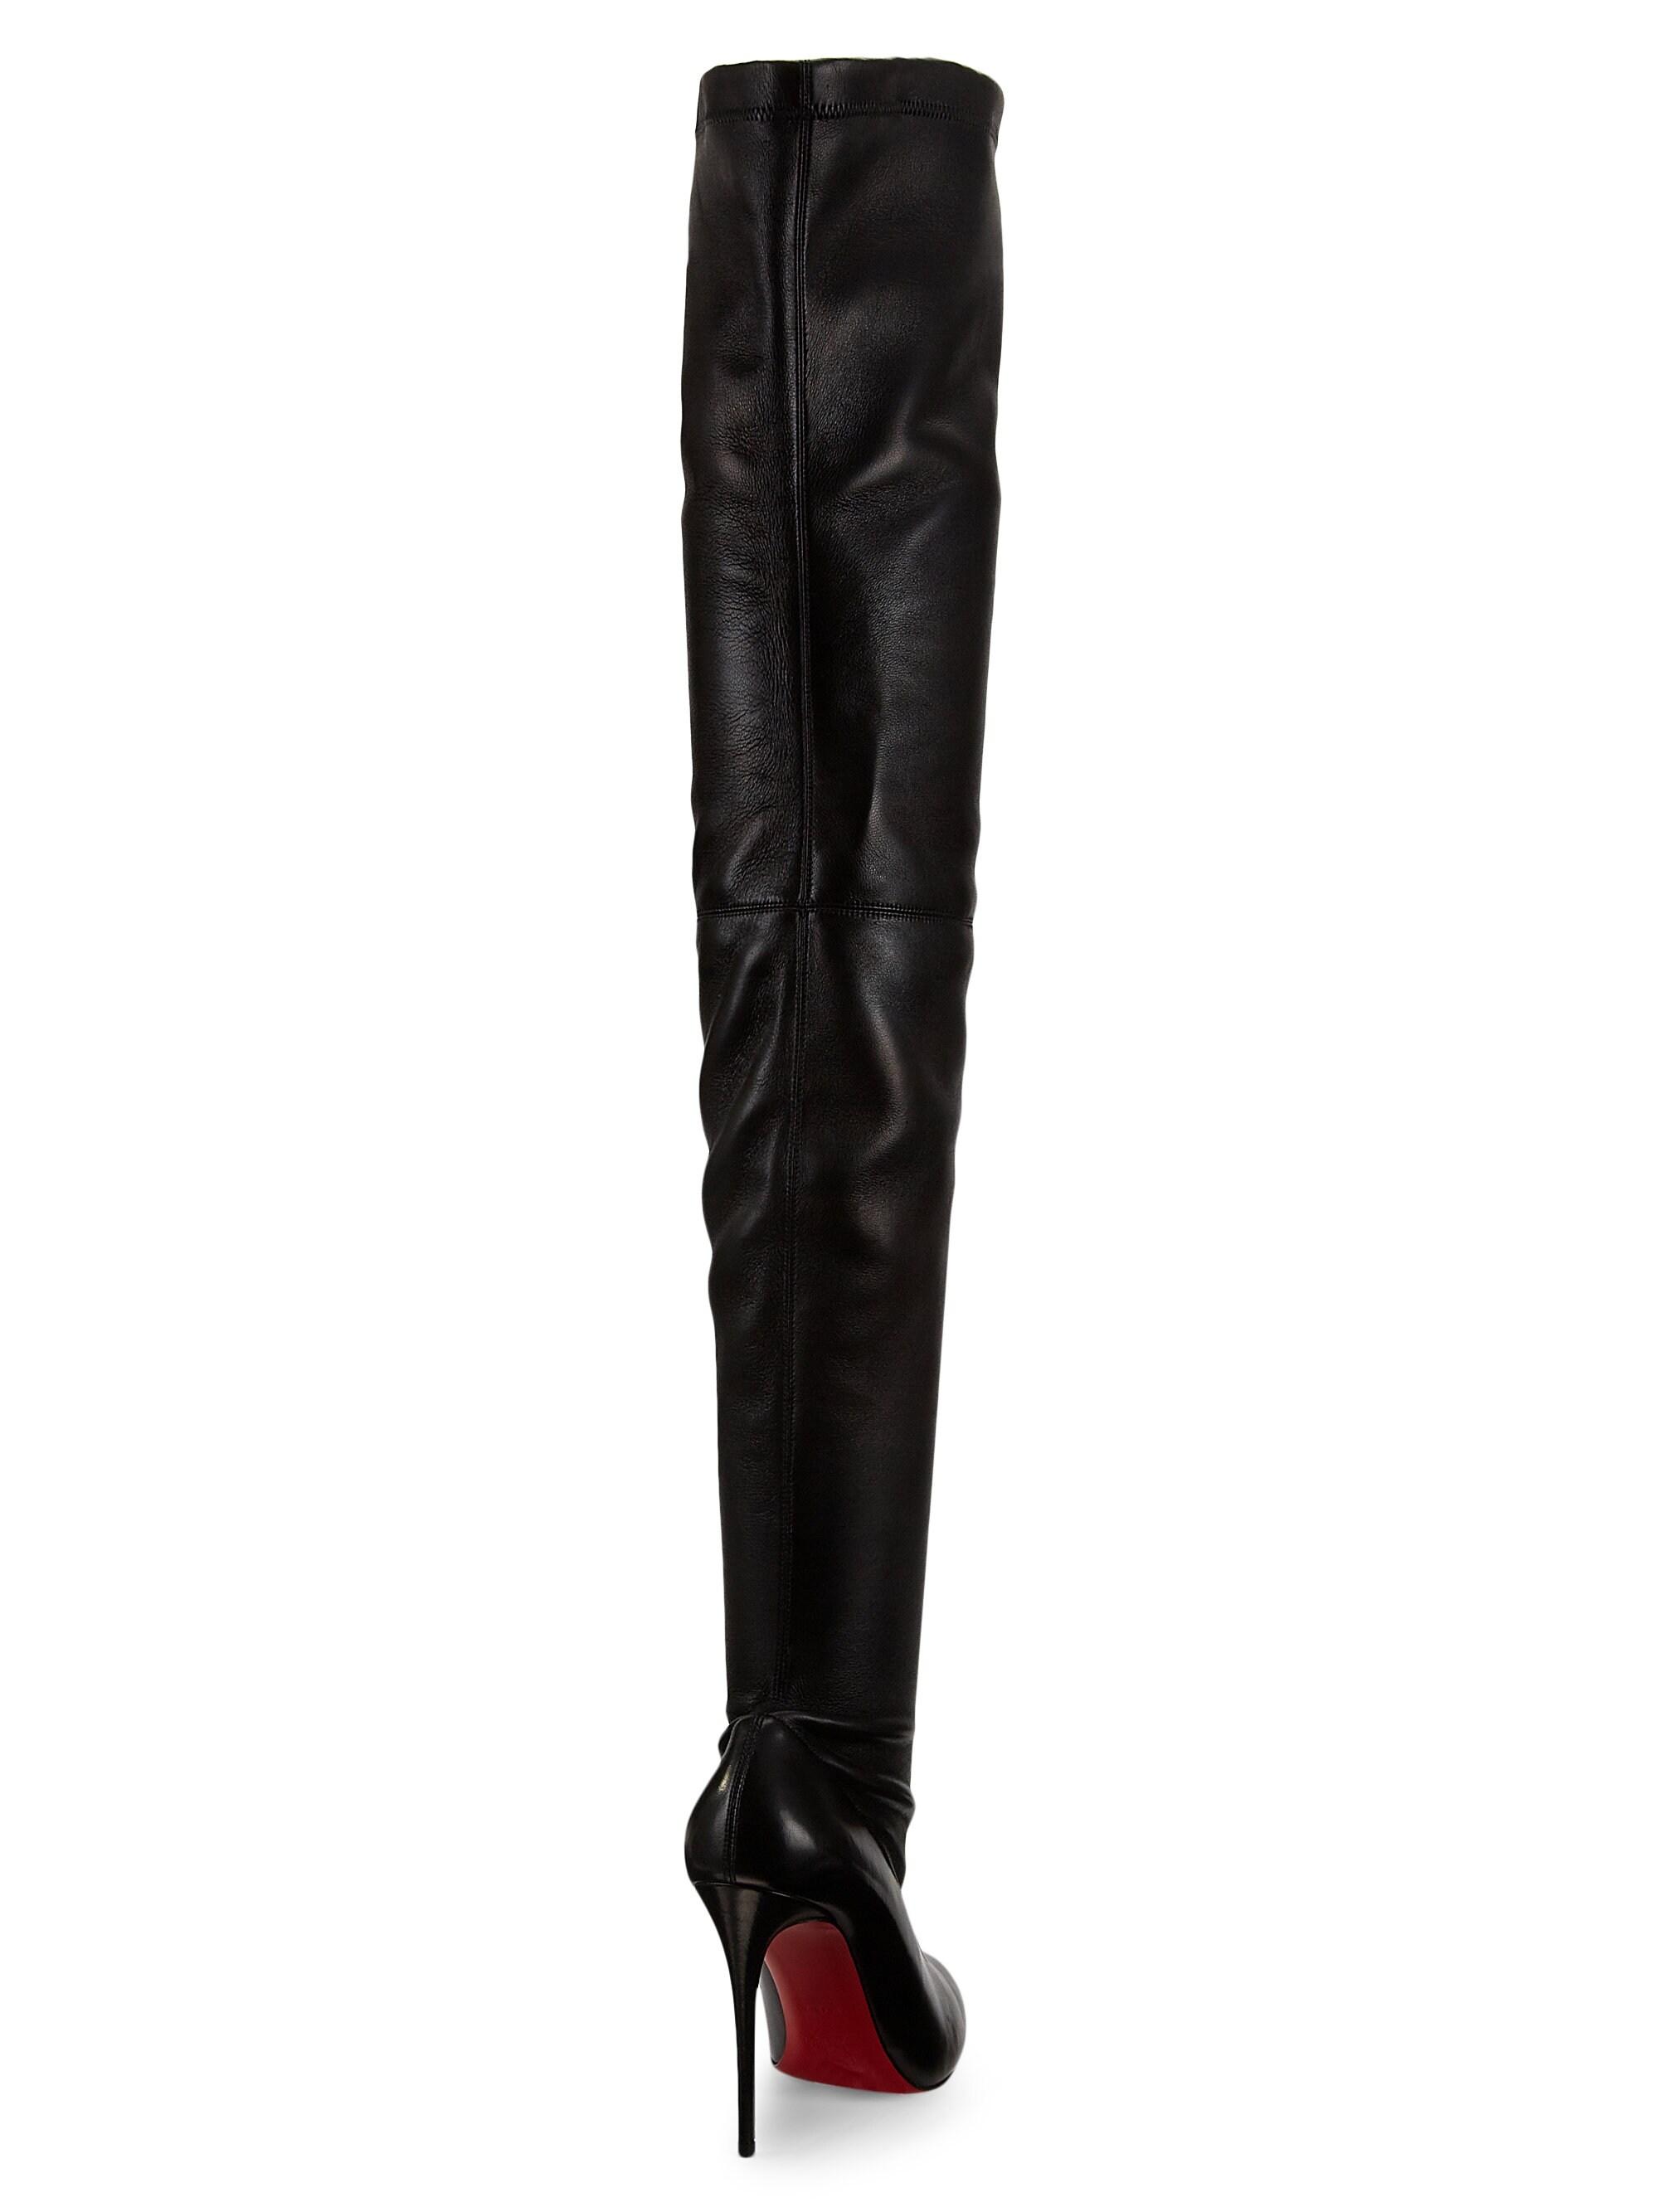 Christian Louboutin Eloux Over-the-knee Stretch Leather Boots in Black -  Lyst